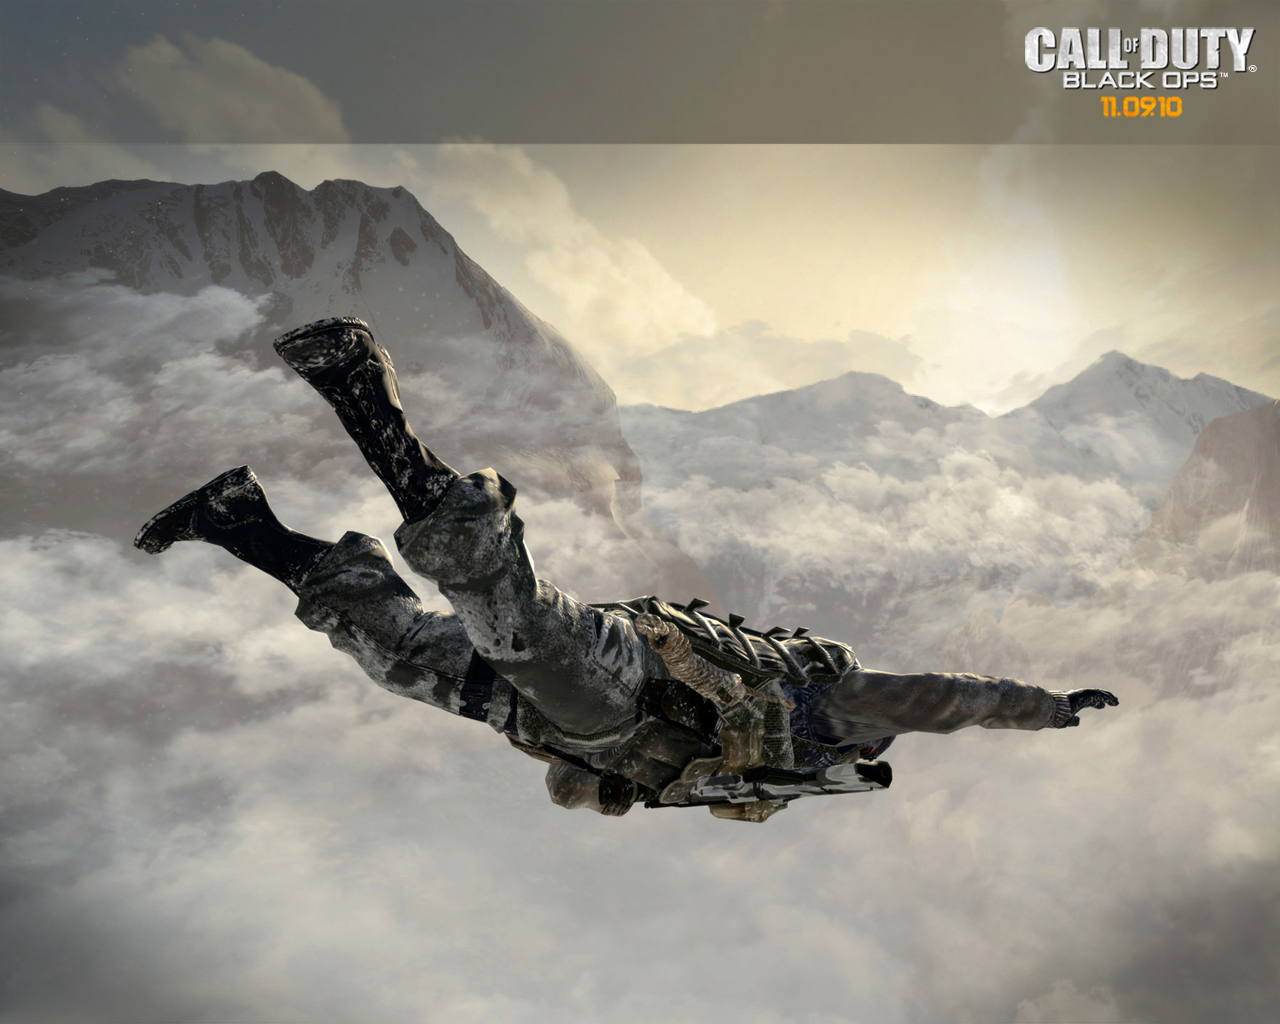 Call of duty black ops wallpapers